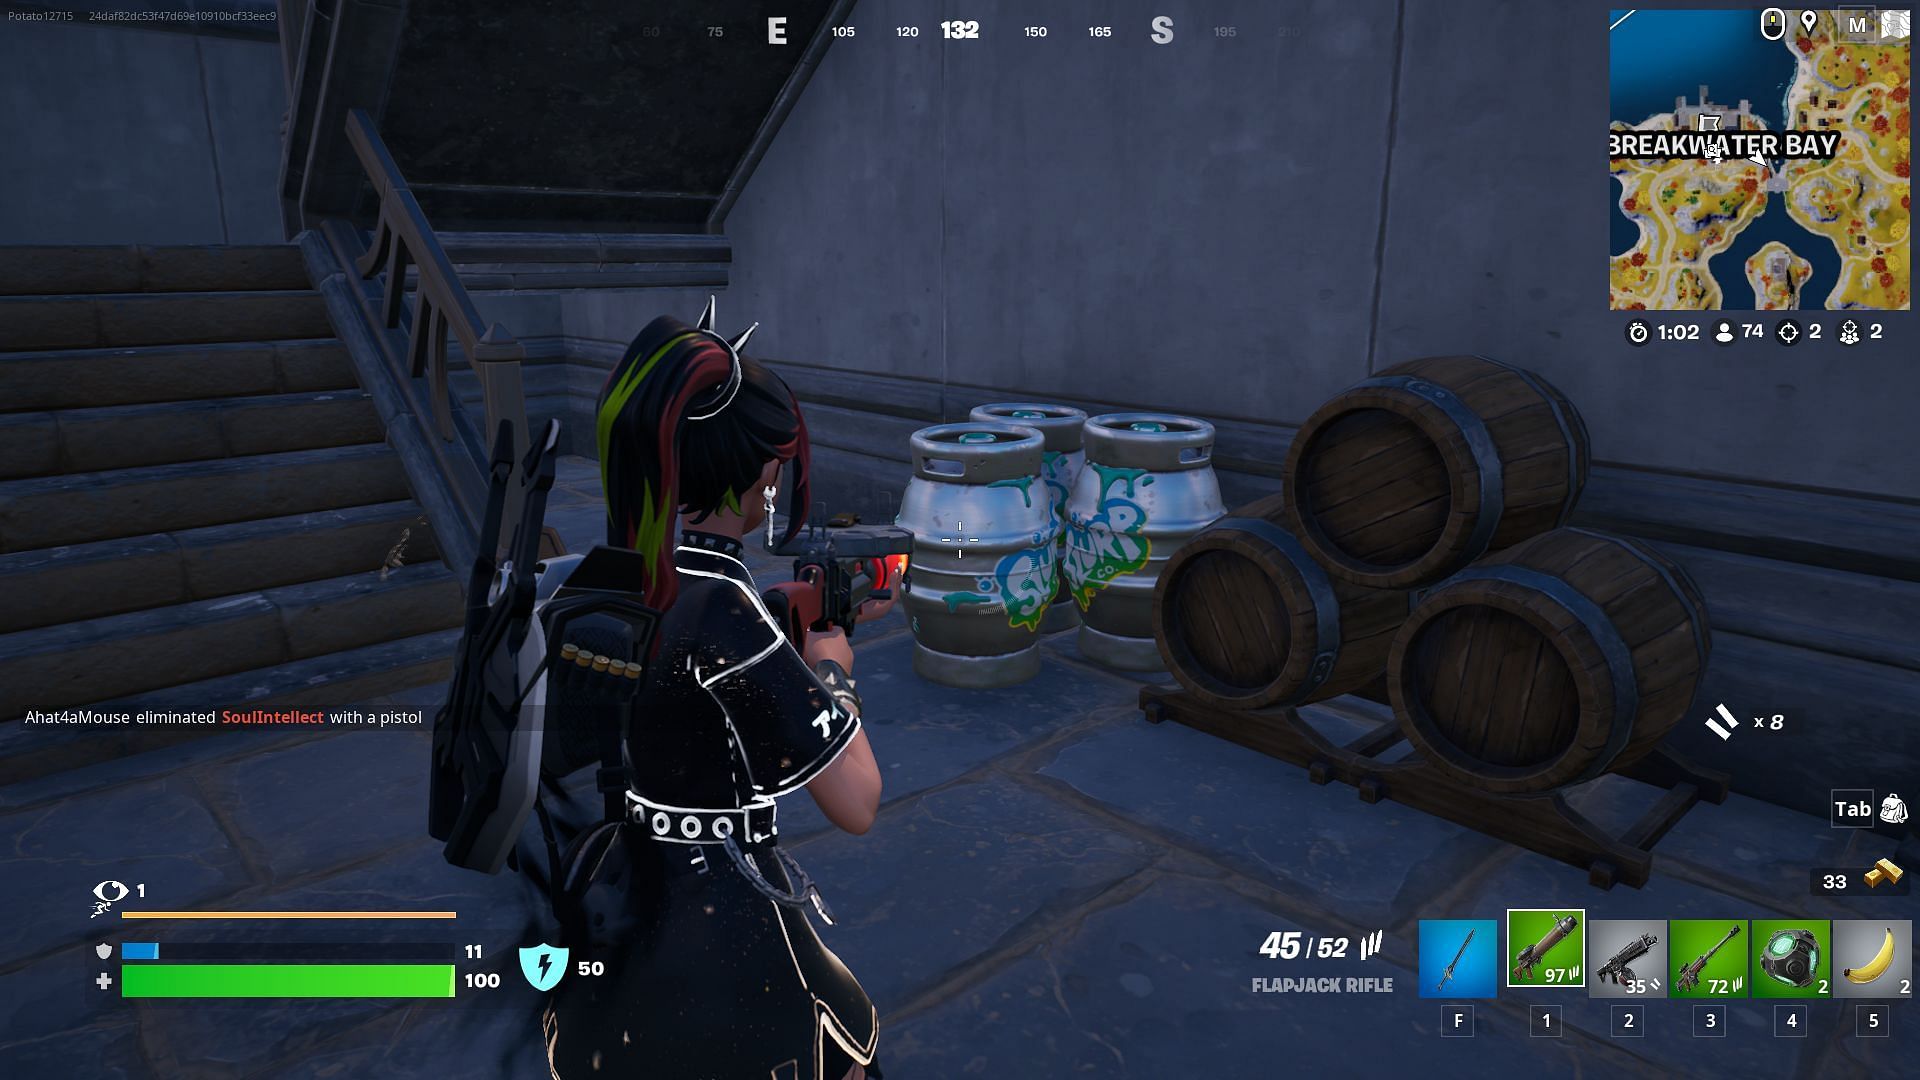 Keep an eye out for Slurp and Slap Barrels while moving around the island (Image via Epic Games/Fortnite)